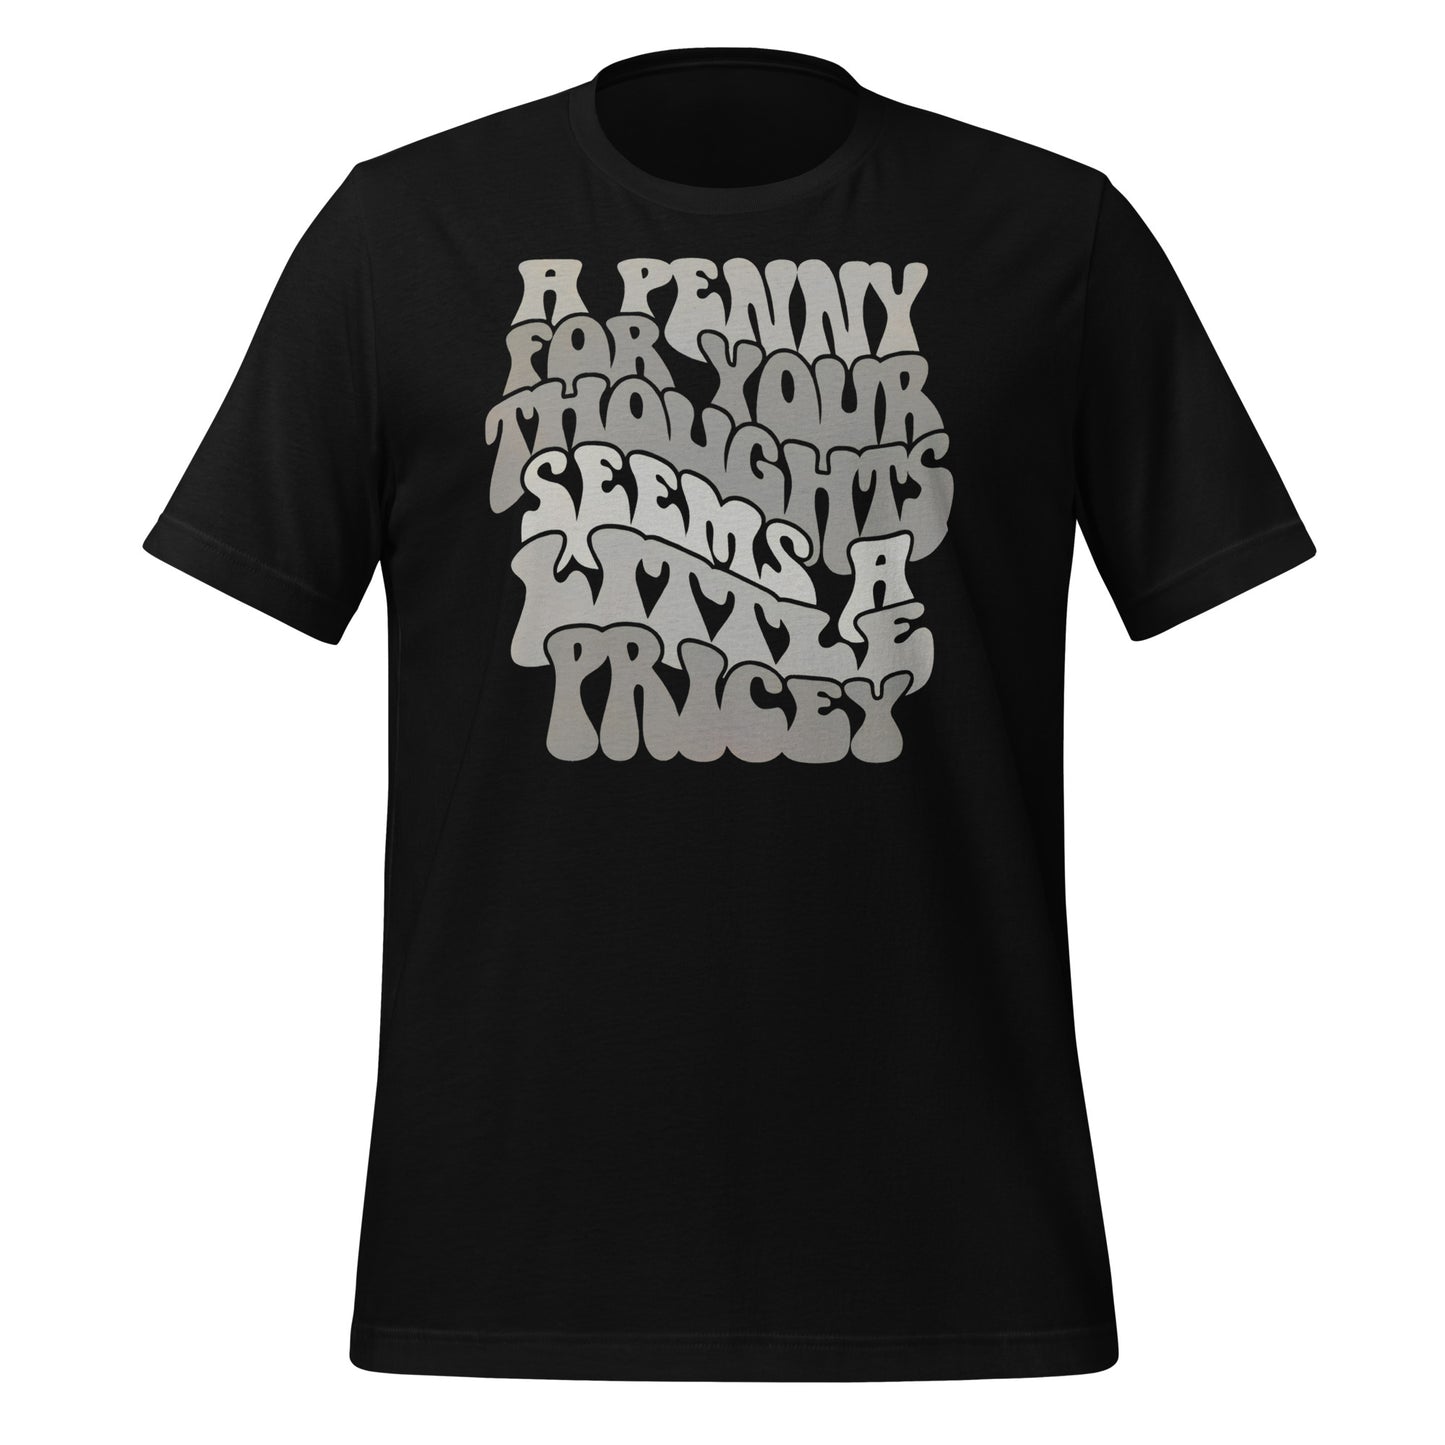 A Penny For Your Thoughts Seems A Little Pricey Funny Bella Canvas Adult T-Shirt